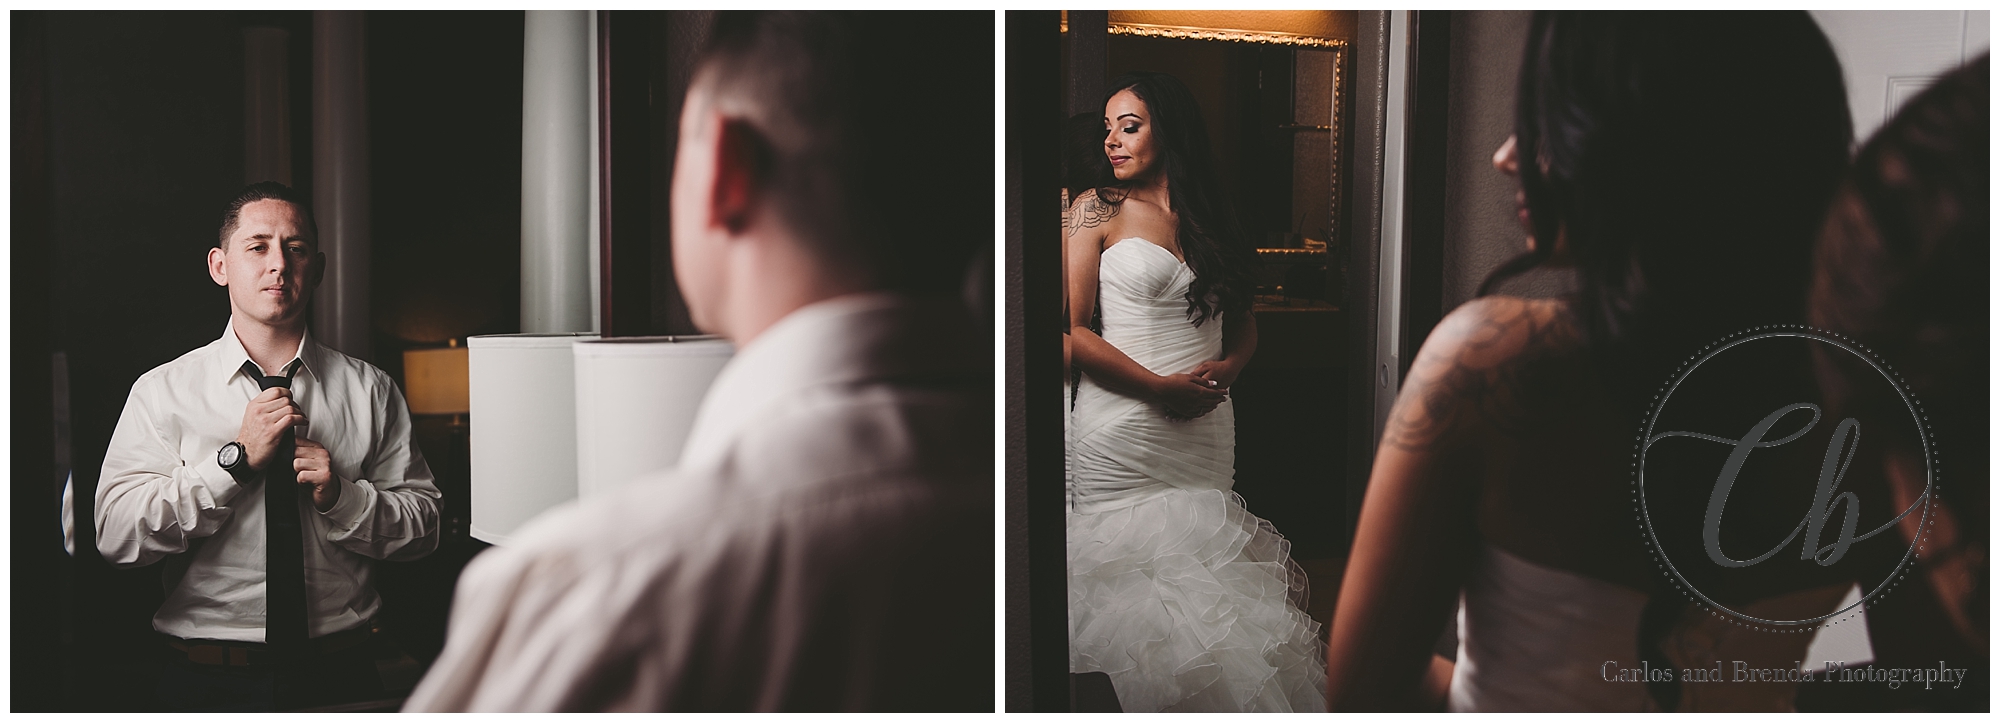 Wedding Elopement Photography getting ready in the hotel at Glamis Dunes California